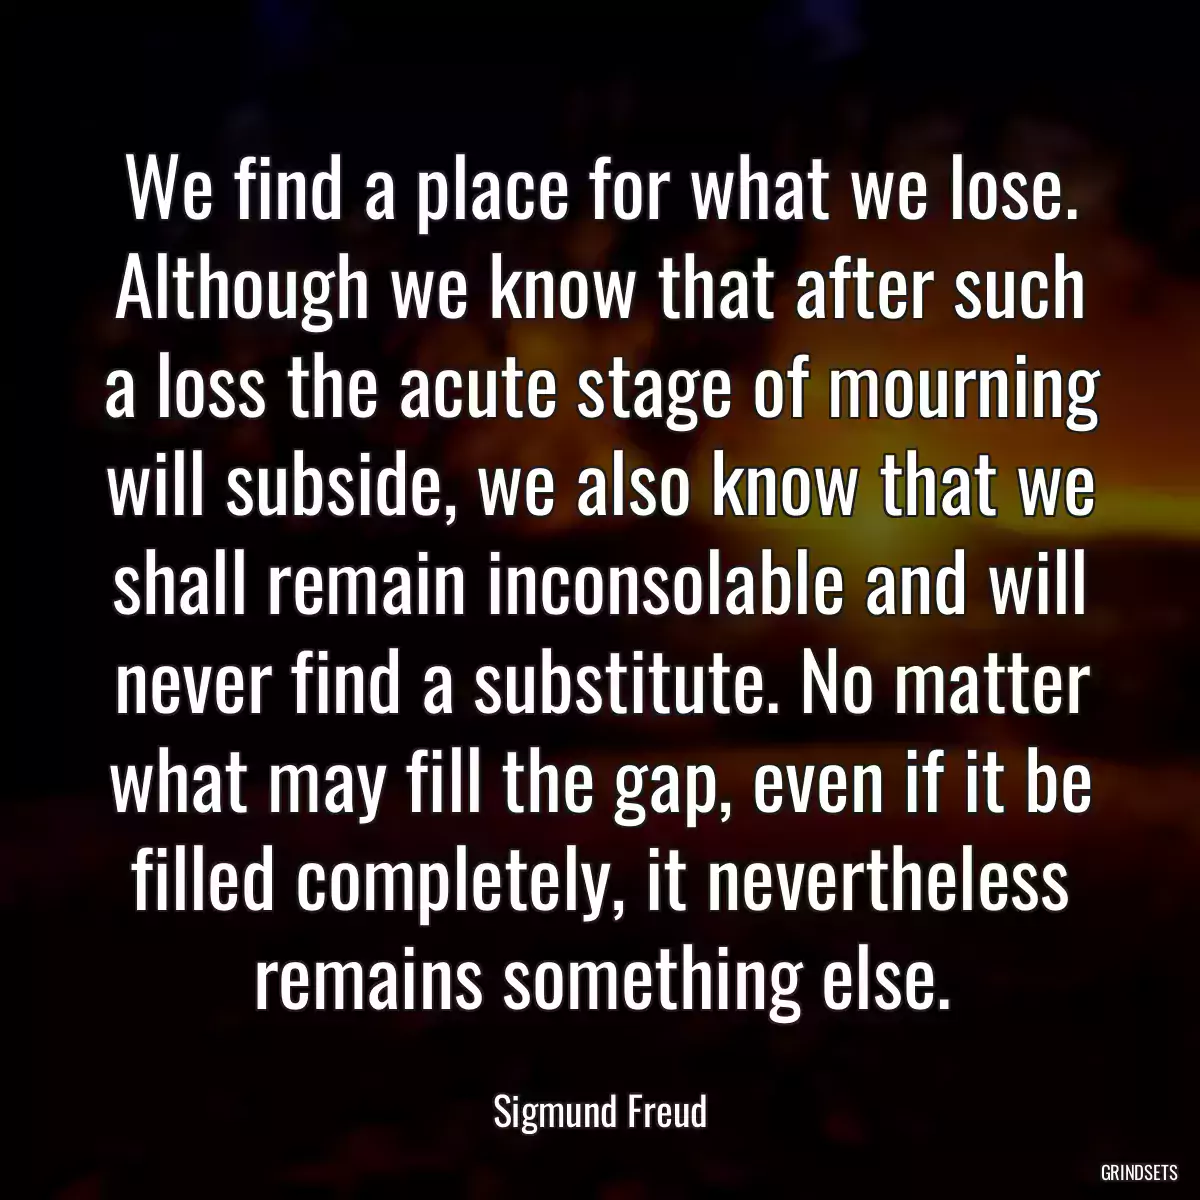 We find a place for what we lose. Although we know that after such a loss the acute stage of mourning will subside, we also know that we shall remain inconsolable and will never find a substitute. No matter what may fill the gap, even if it be filled completely, it nevertheless remains something else.